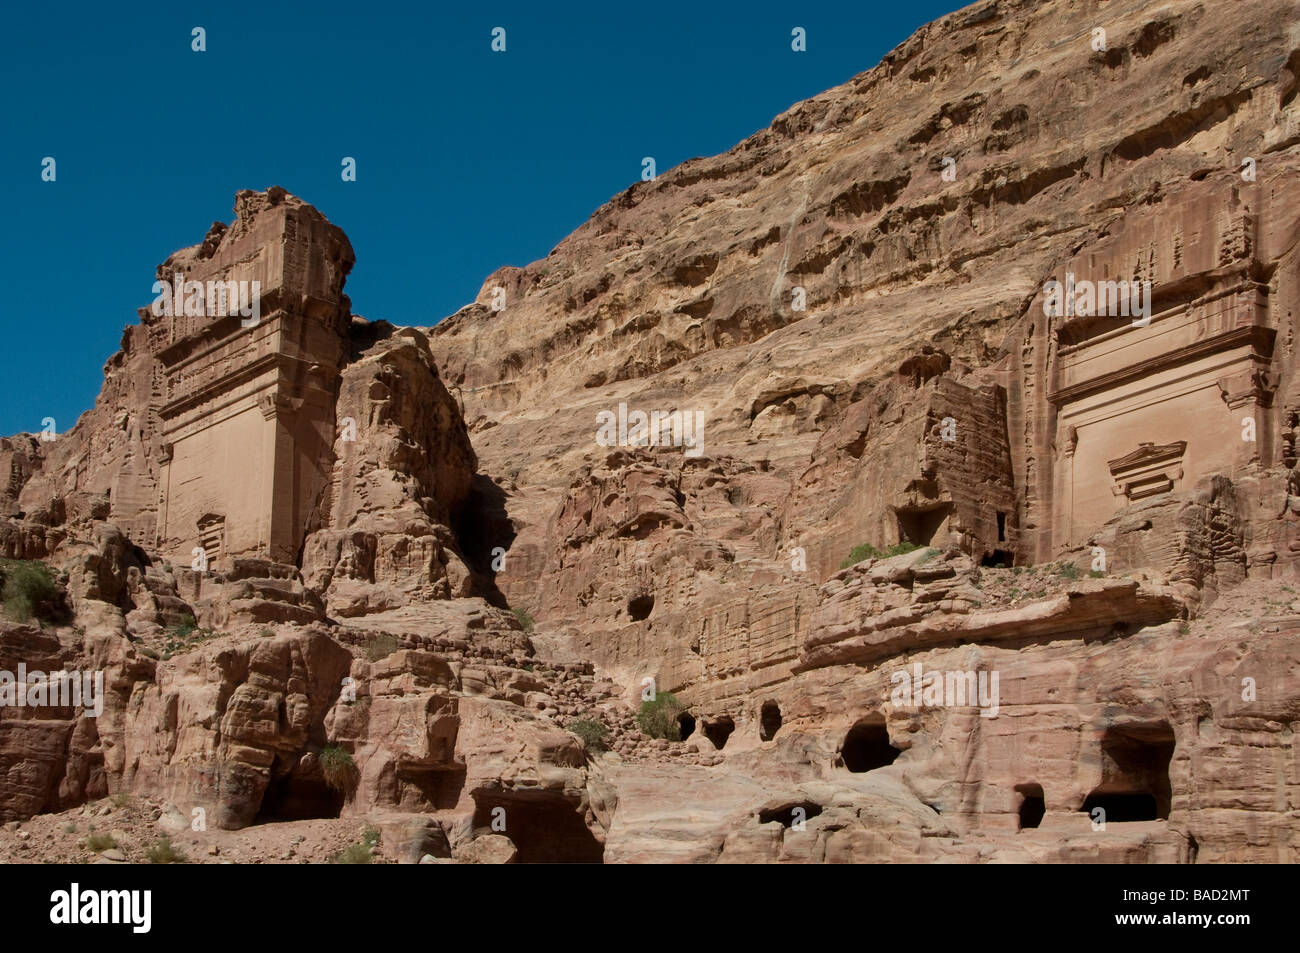 View of the Aneisho and Uneishu rock cut Tombs carved into cliff face in the ancient Nabatean city of Petra Jordan Stock Photo